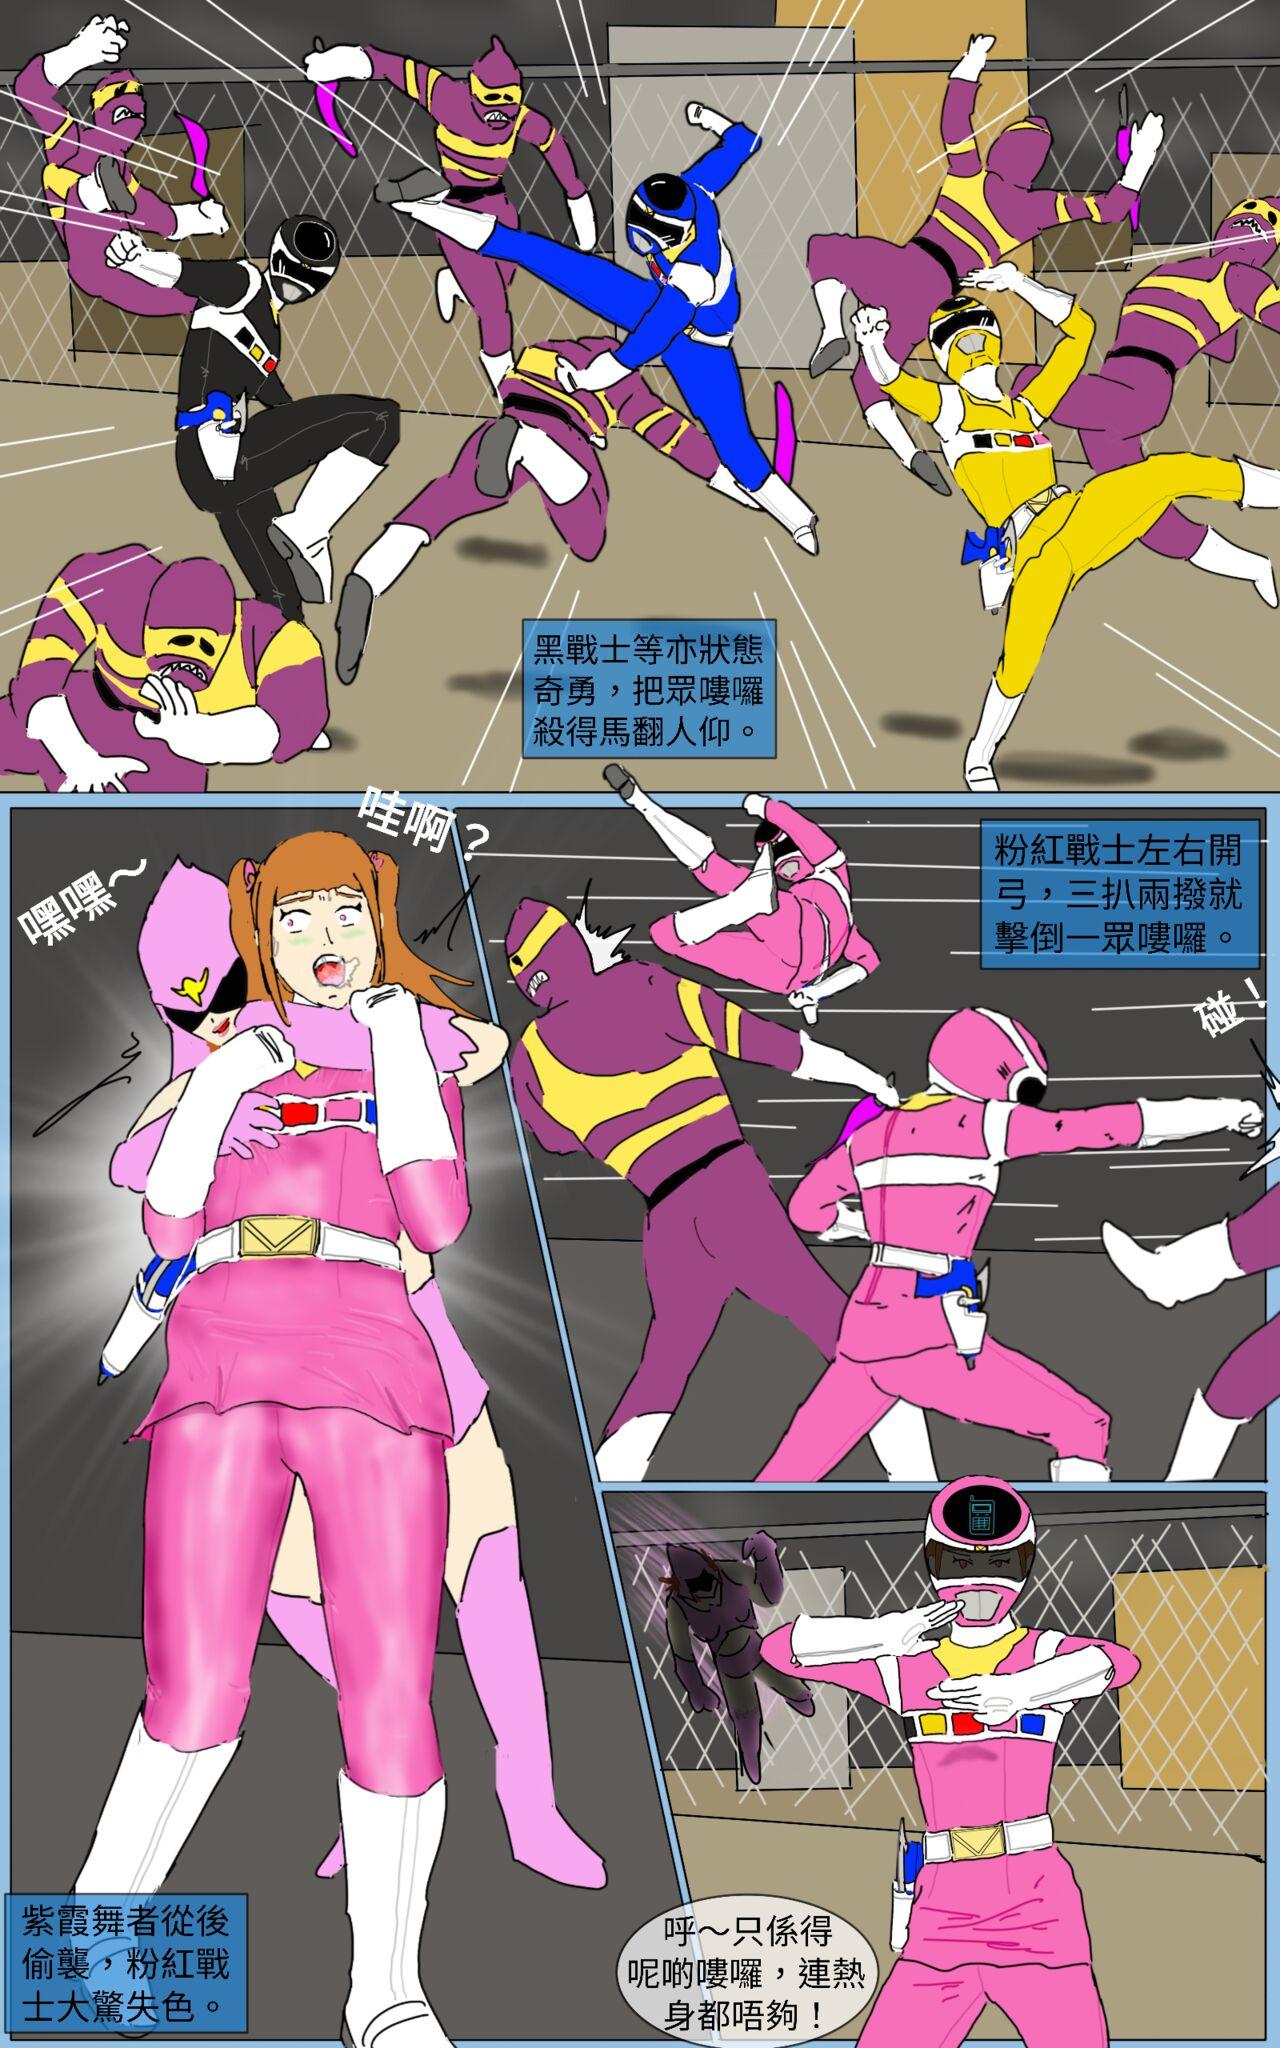 Jerking Off Mission 23 - Super sentai Russian - Page 3